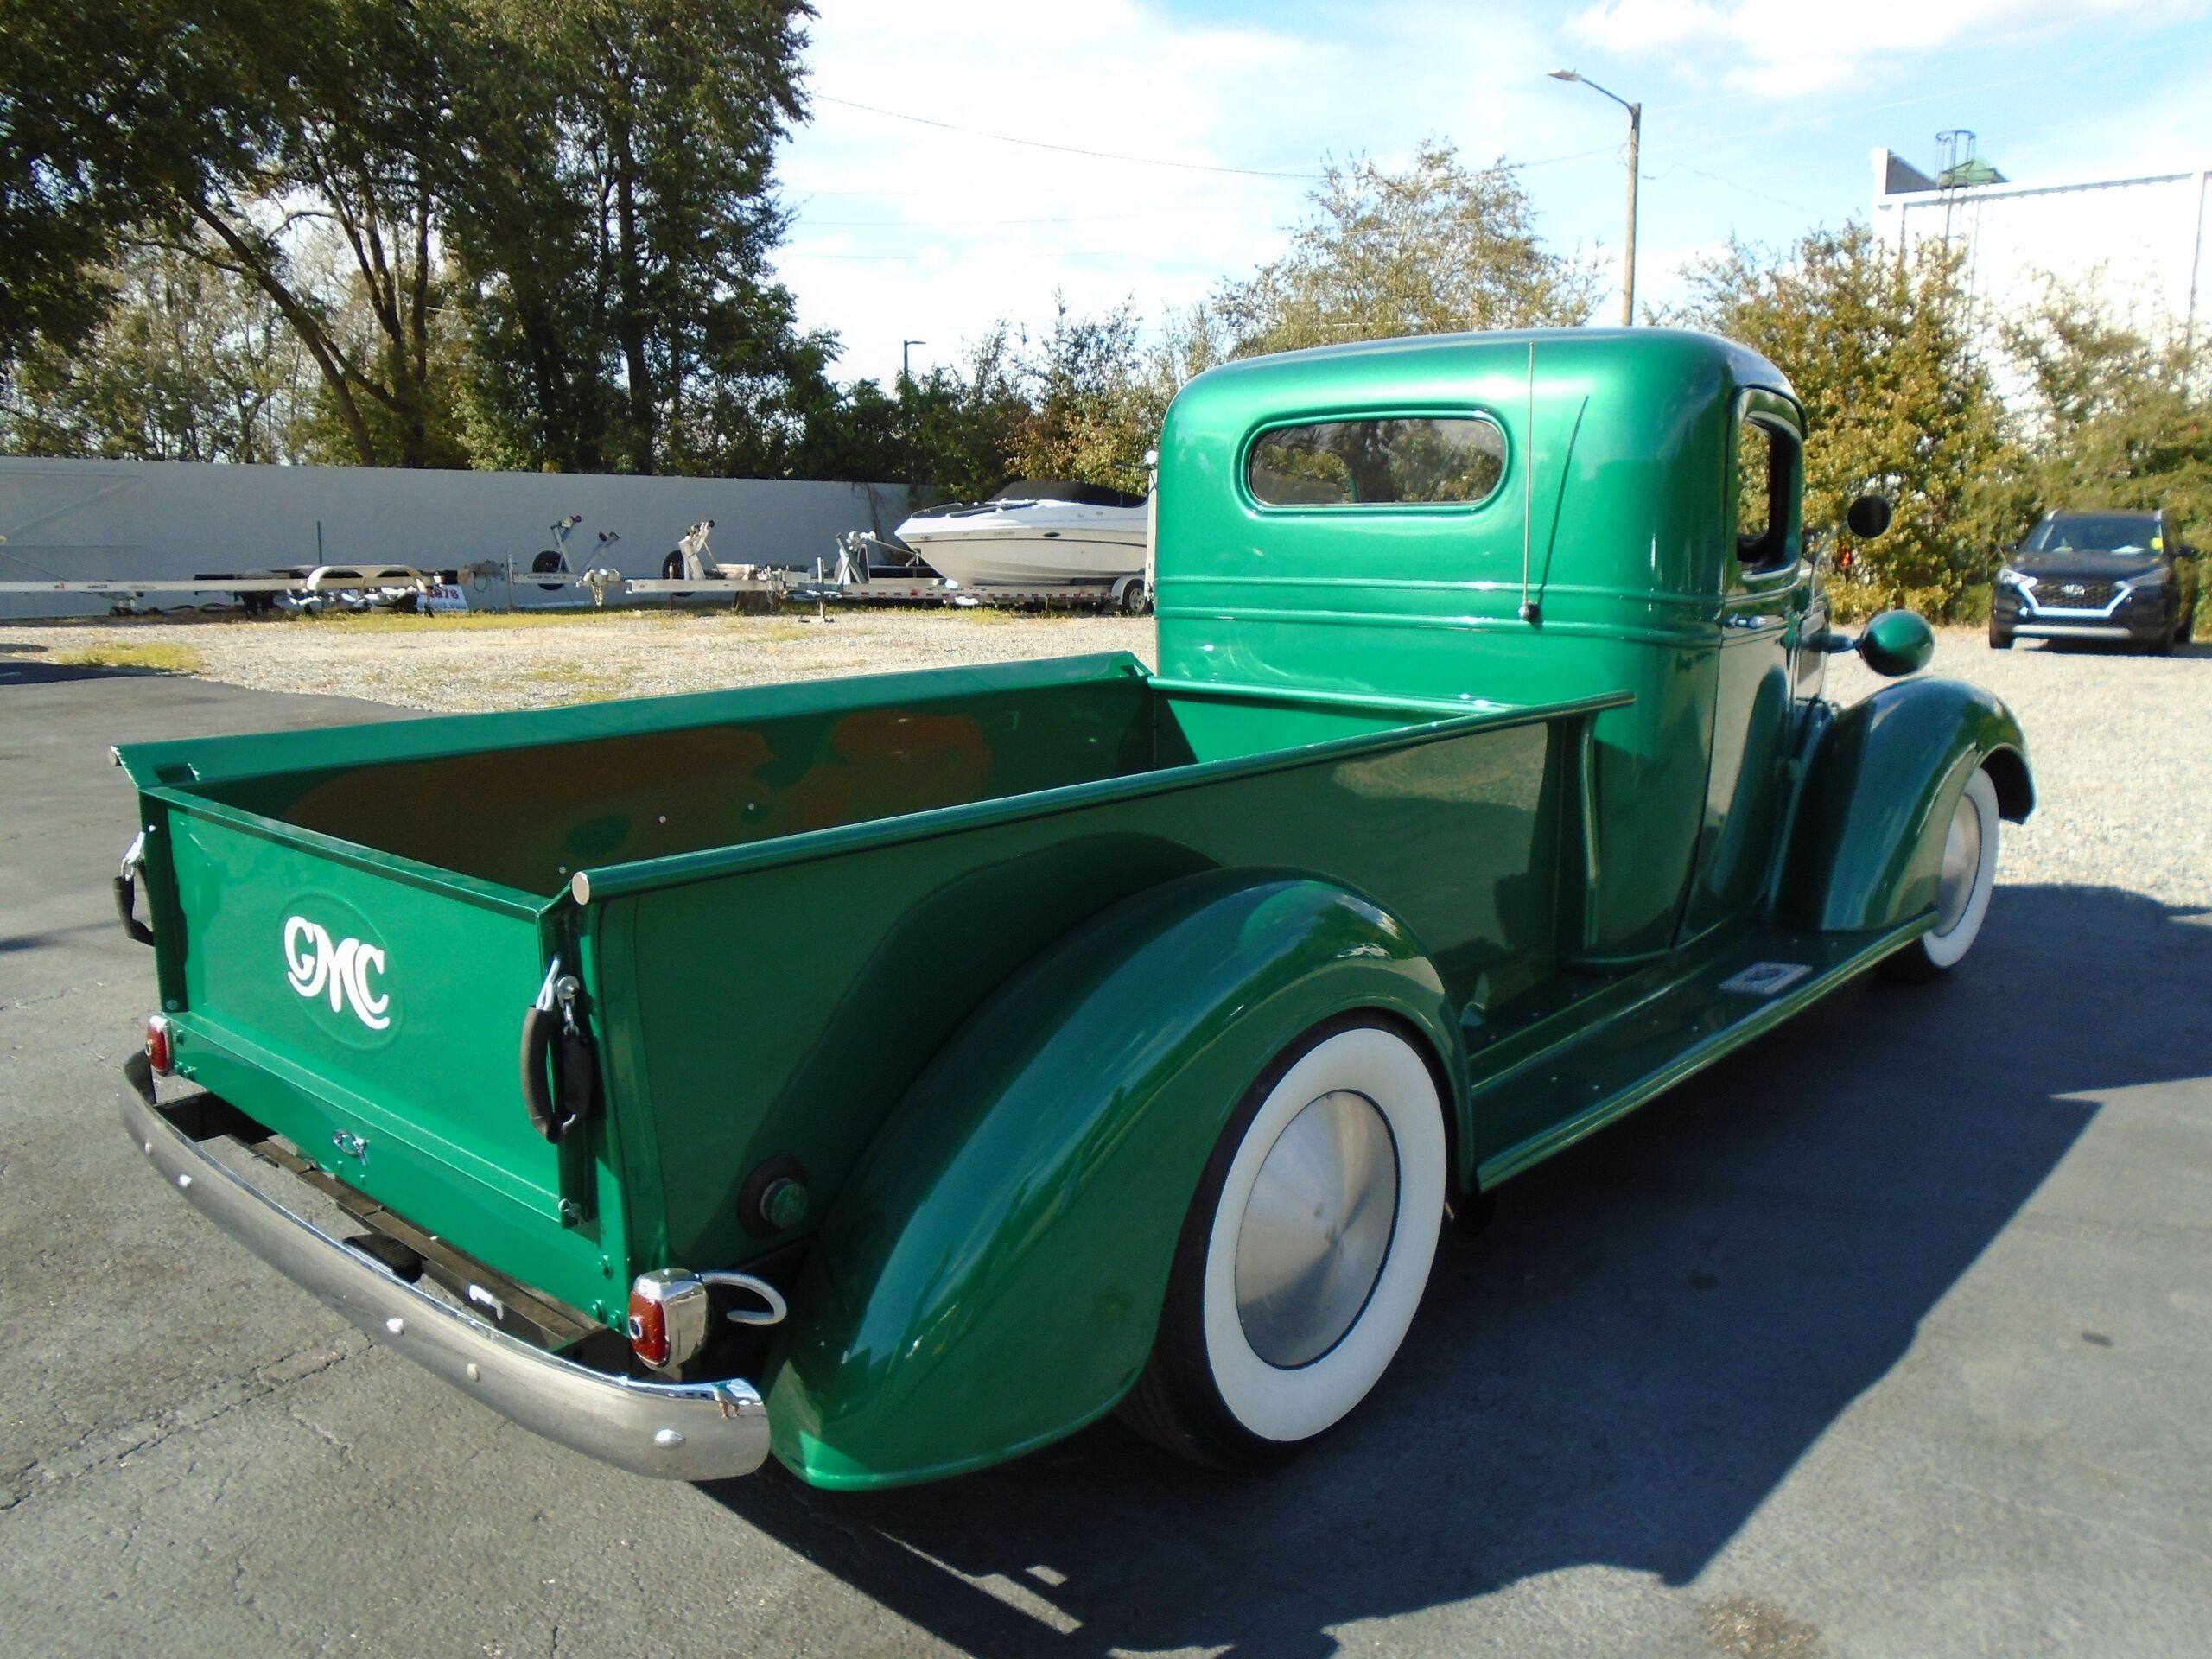 1937 GMC  Long bed  (Longbeds are rare) 4